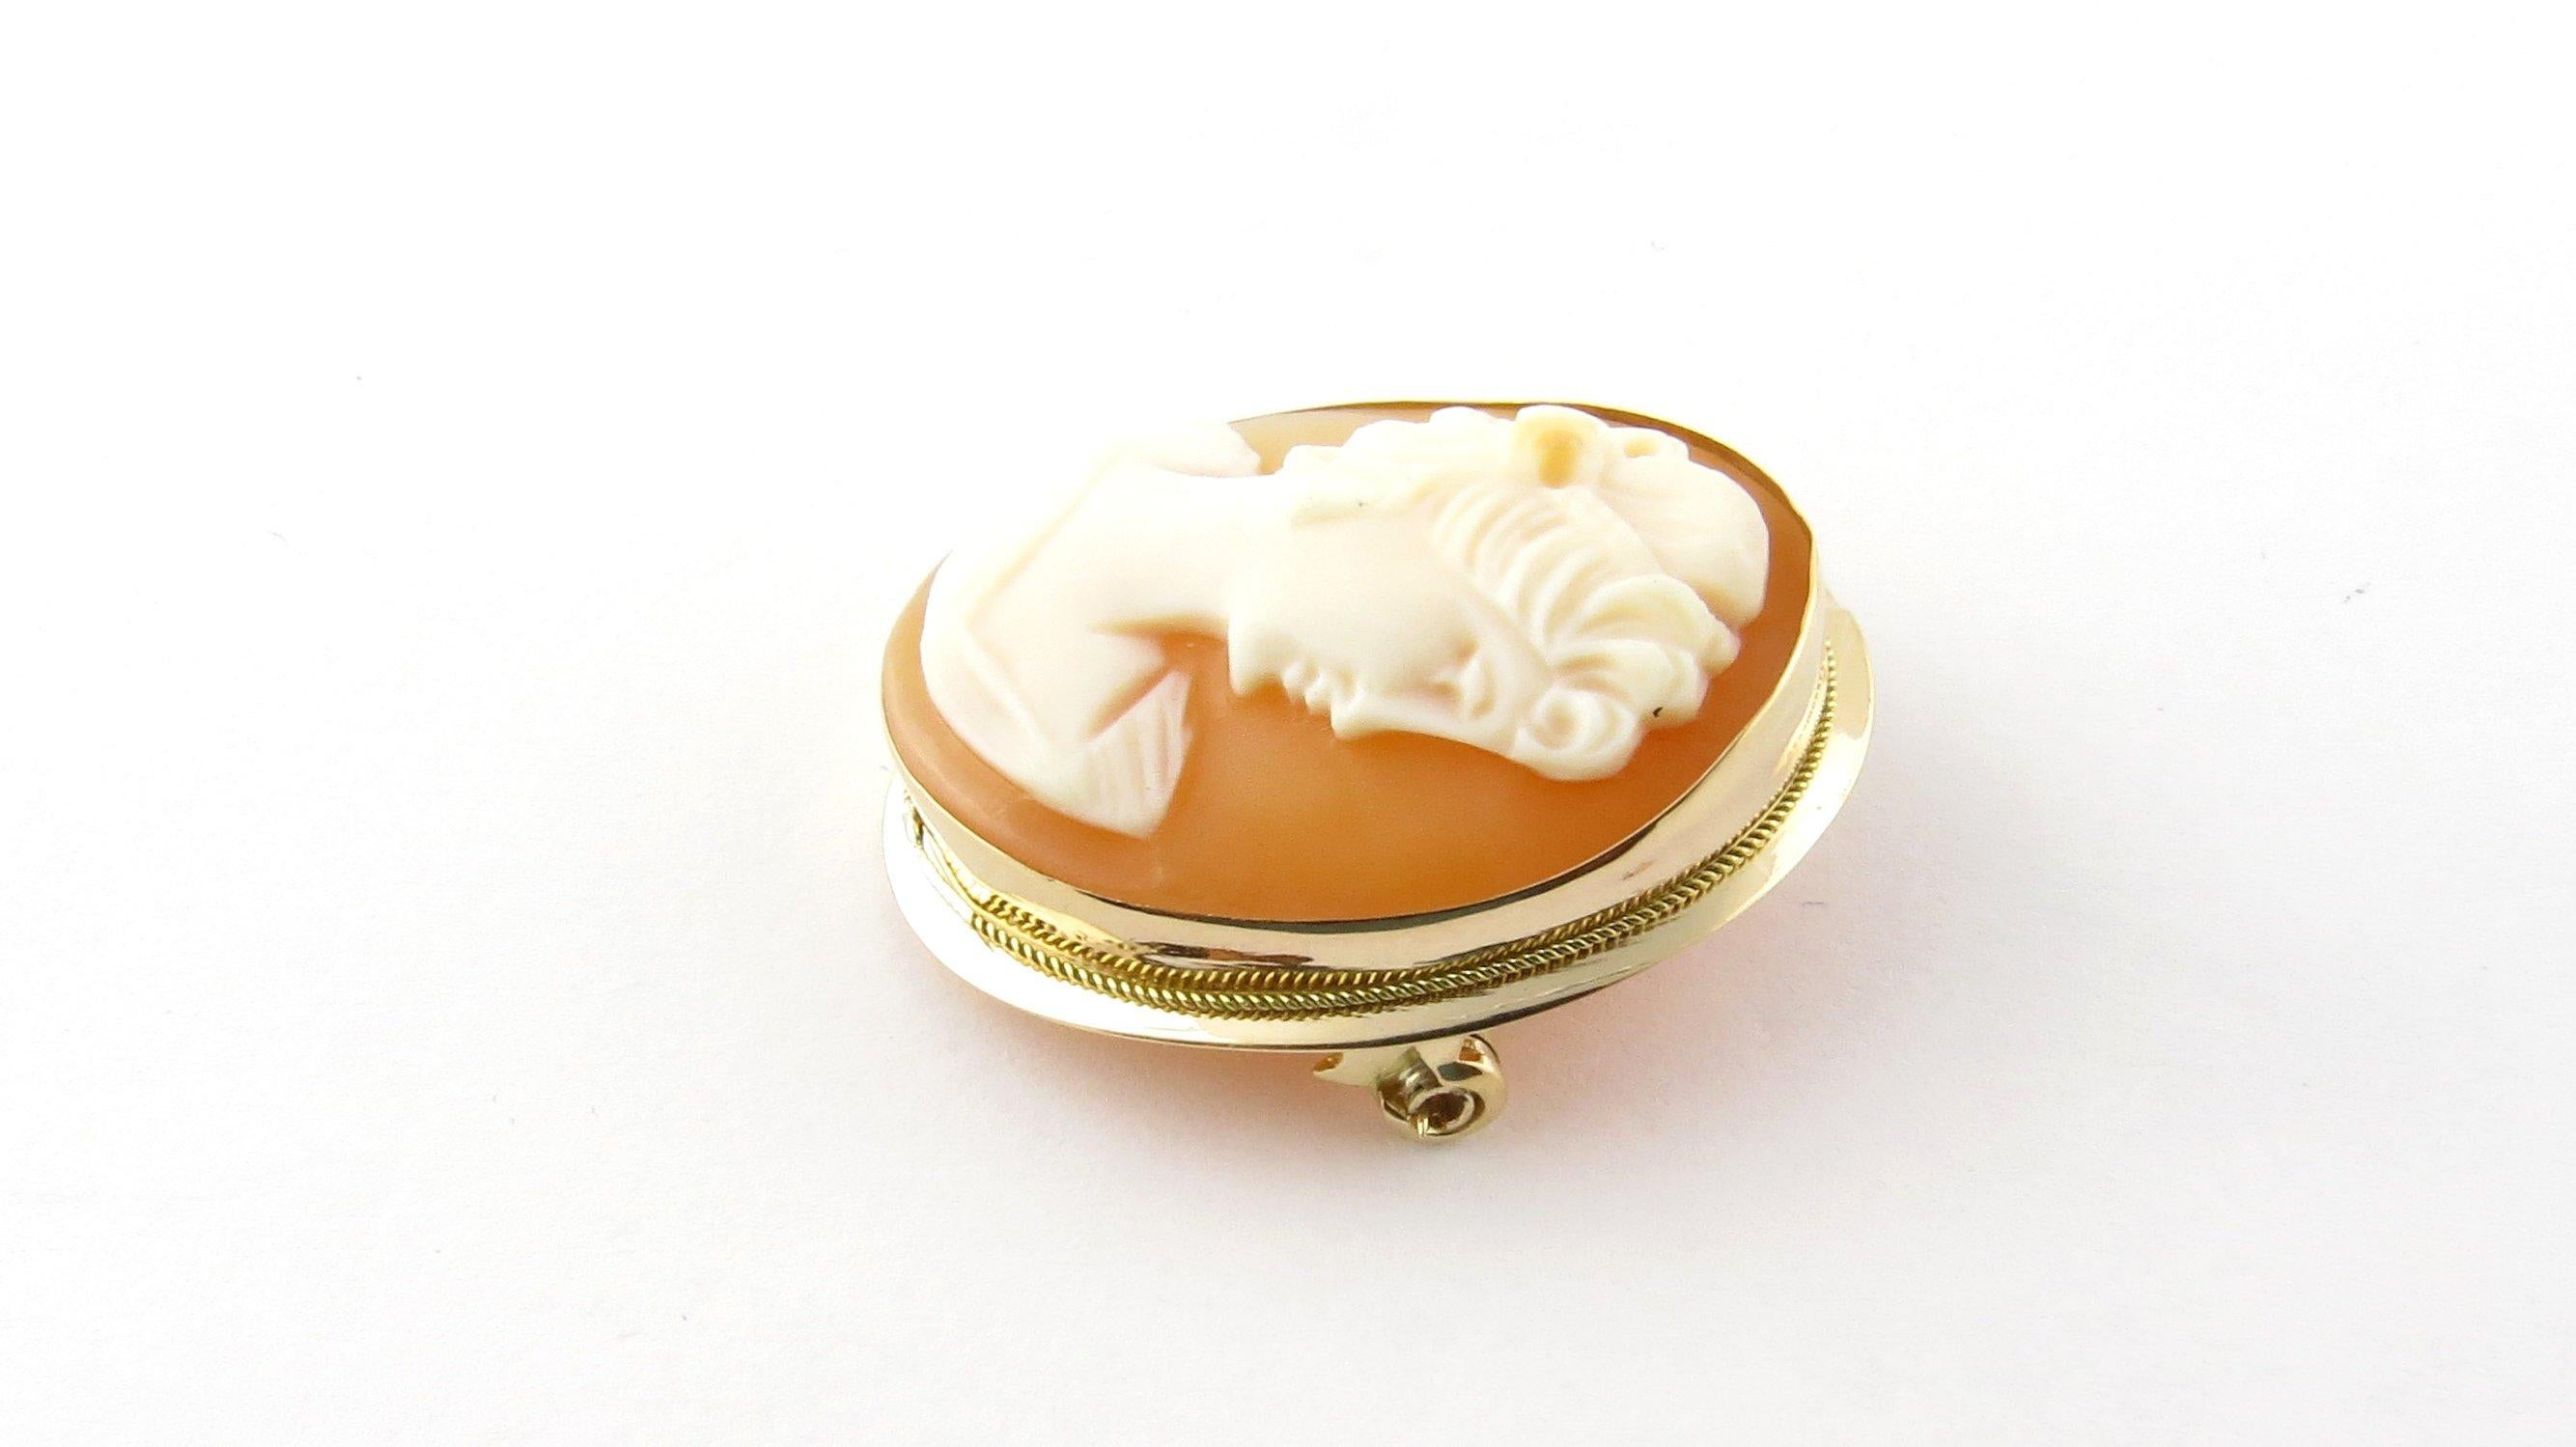 Vintage 18 Karat Yellow Gold Cameo Brooch/Pendant. This elegant cameo features a lovely lady in profile framed in 18K yellow gold. Can be worn as a brooch or a pendant.
Size: 27 mm x 22 mm. Weight: 2.9 dwt. / 4.6 gr. Stamped: 750
Very good